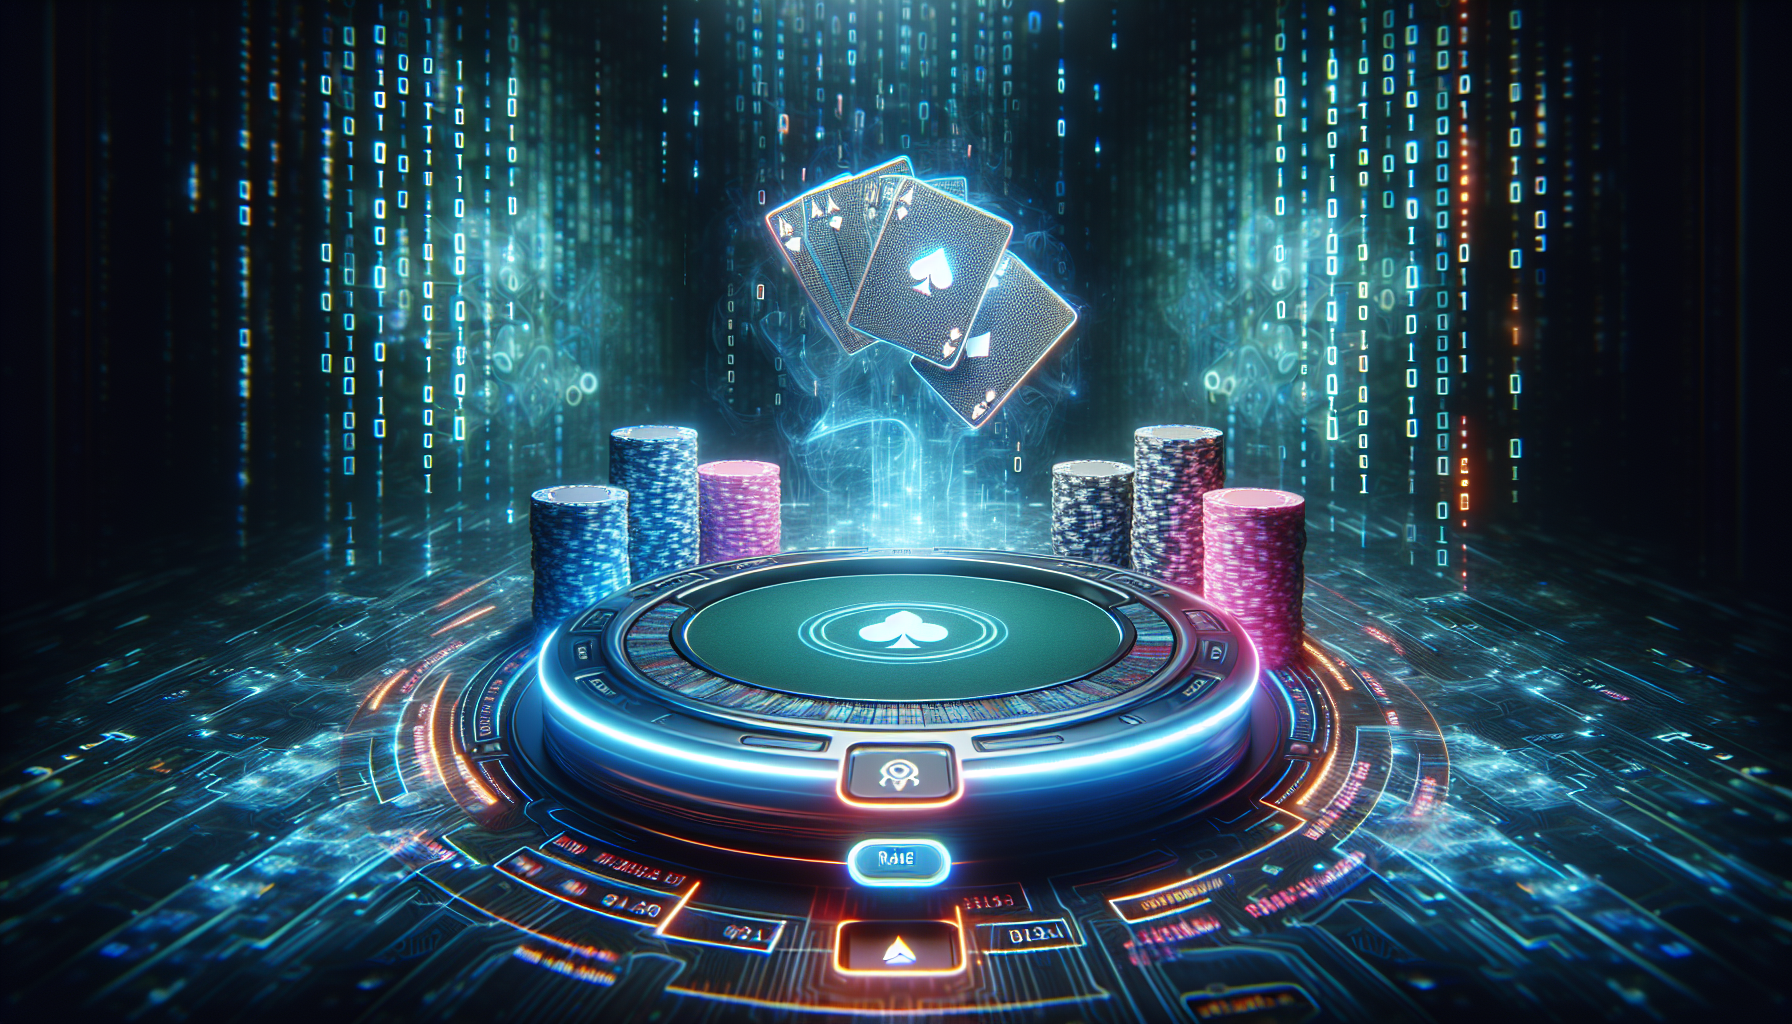 Online poker table with virtual chips and cards